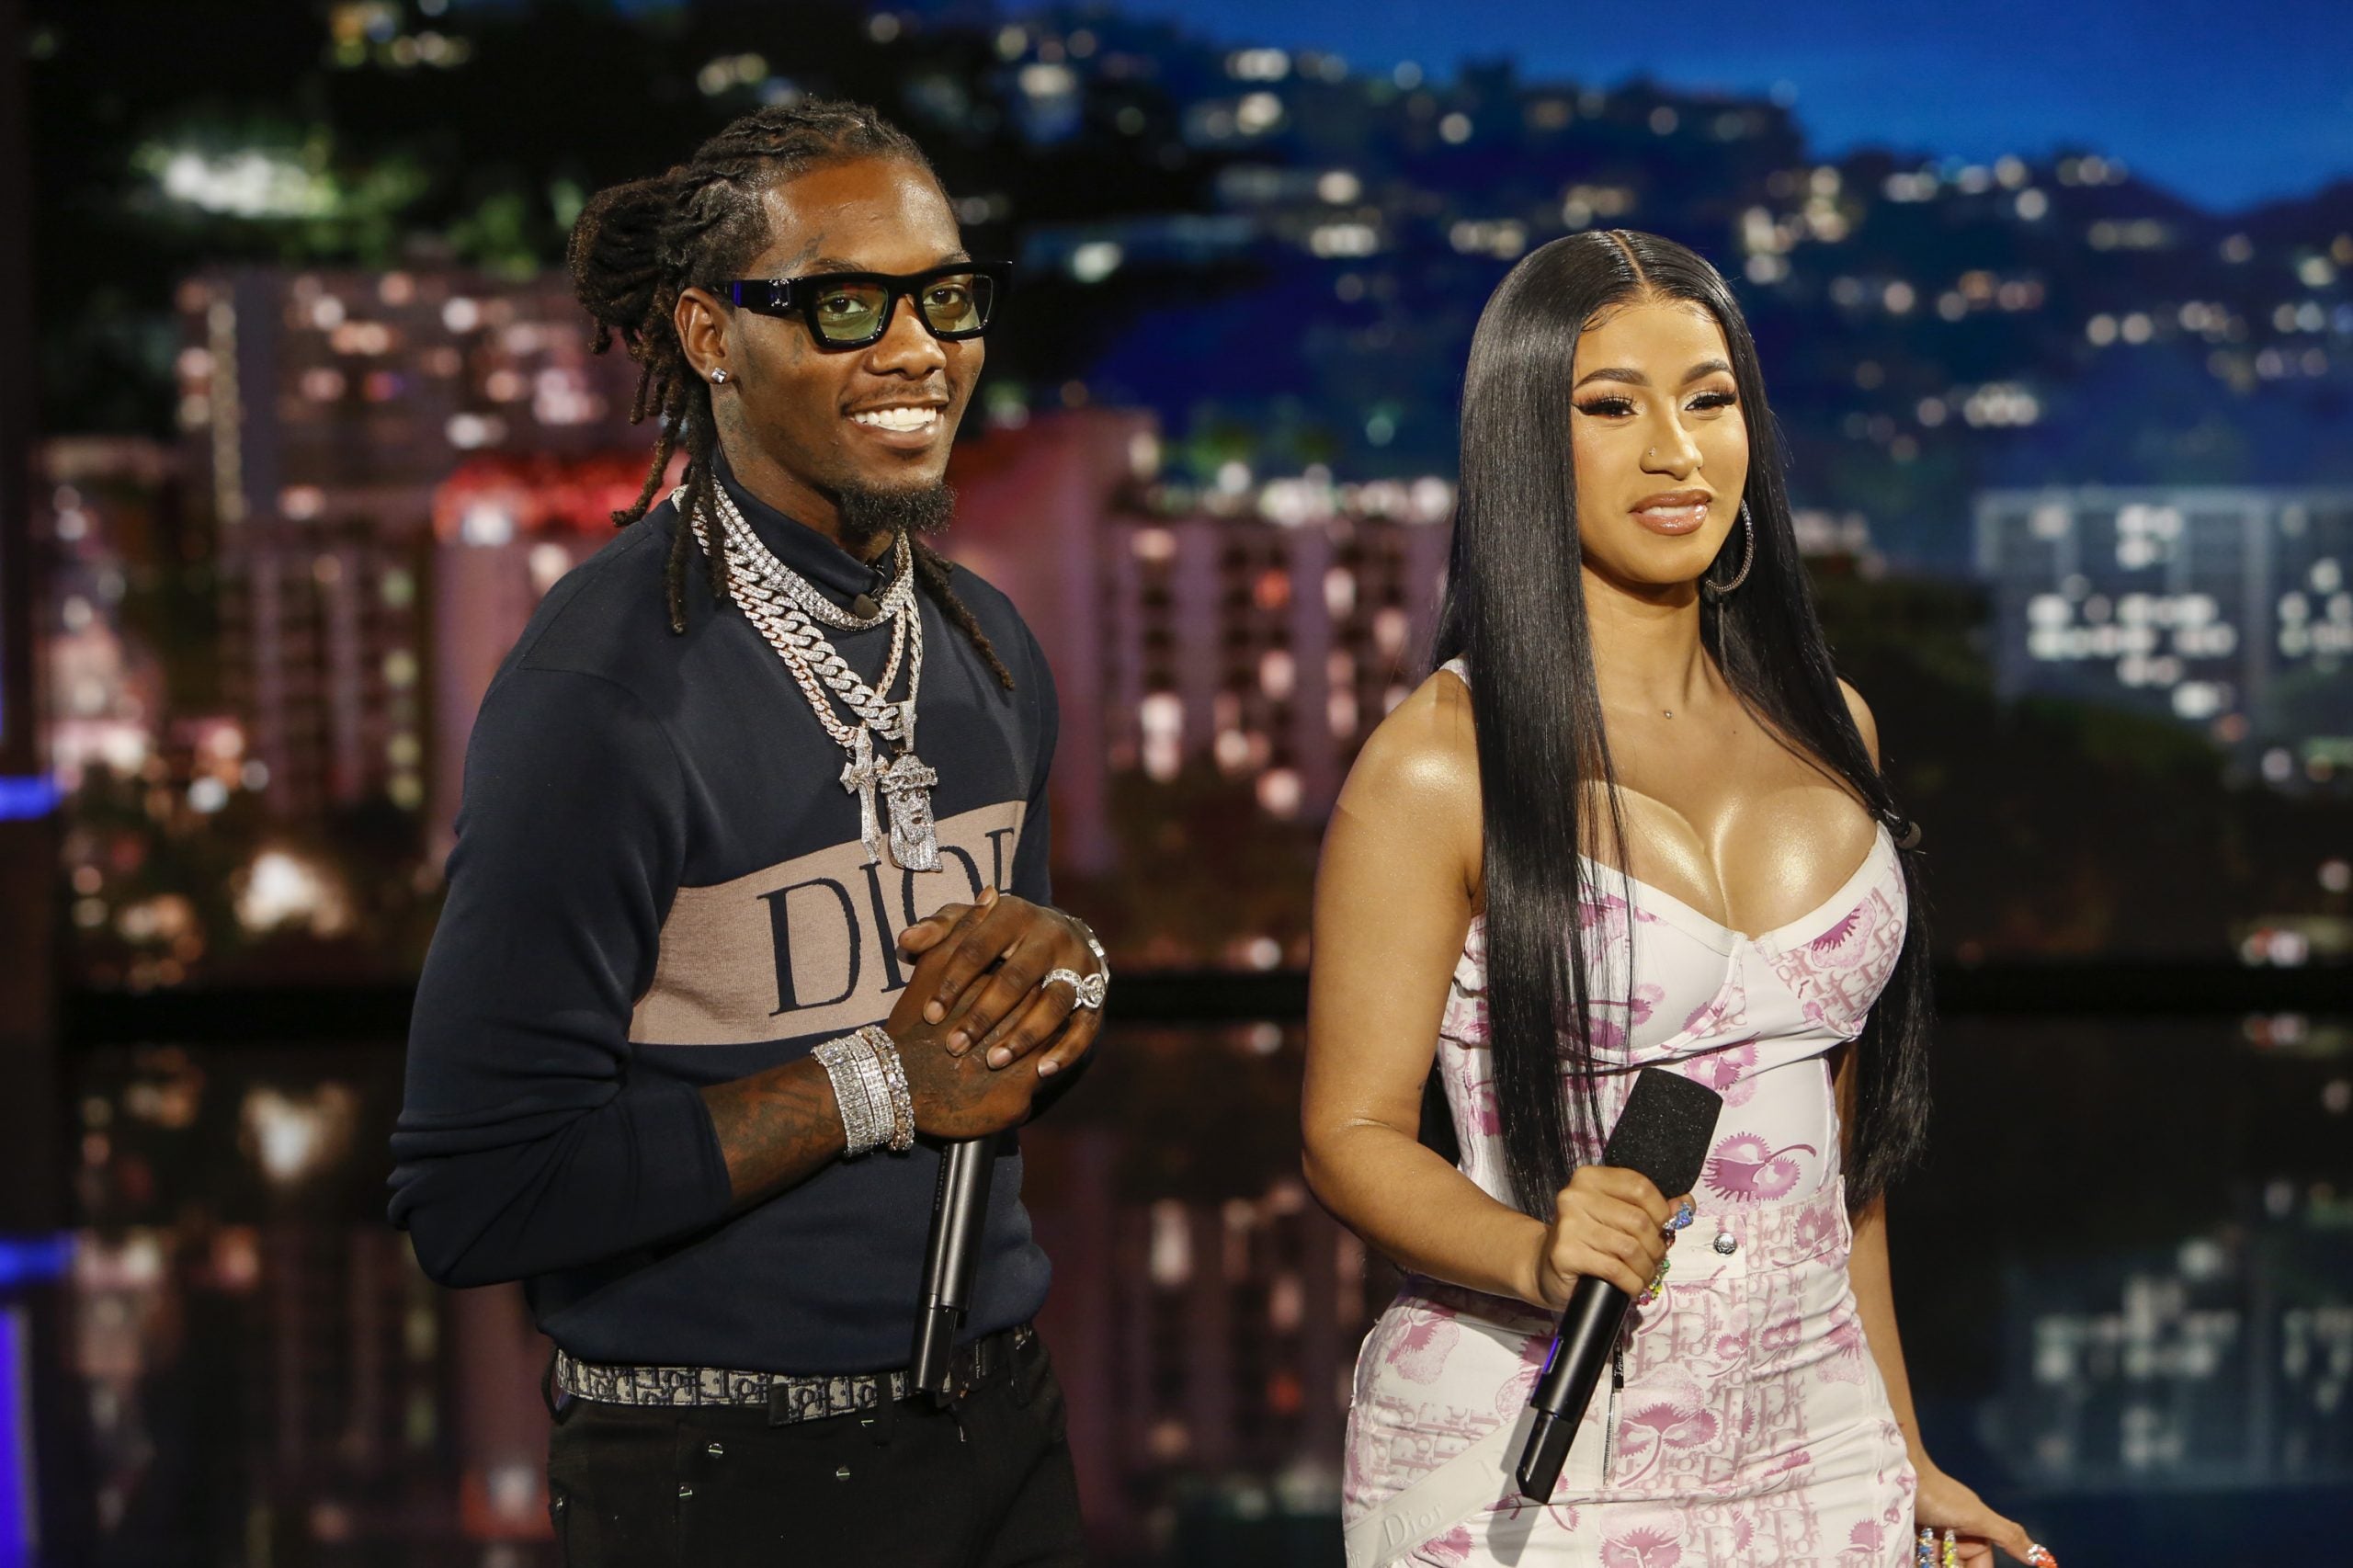 Cardi B Defends Her Relationship With Offset: ‘It’s Always Us Against The World’